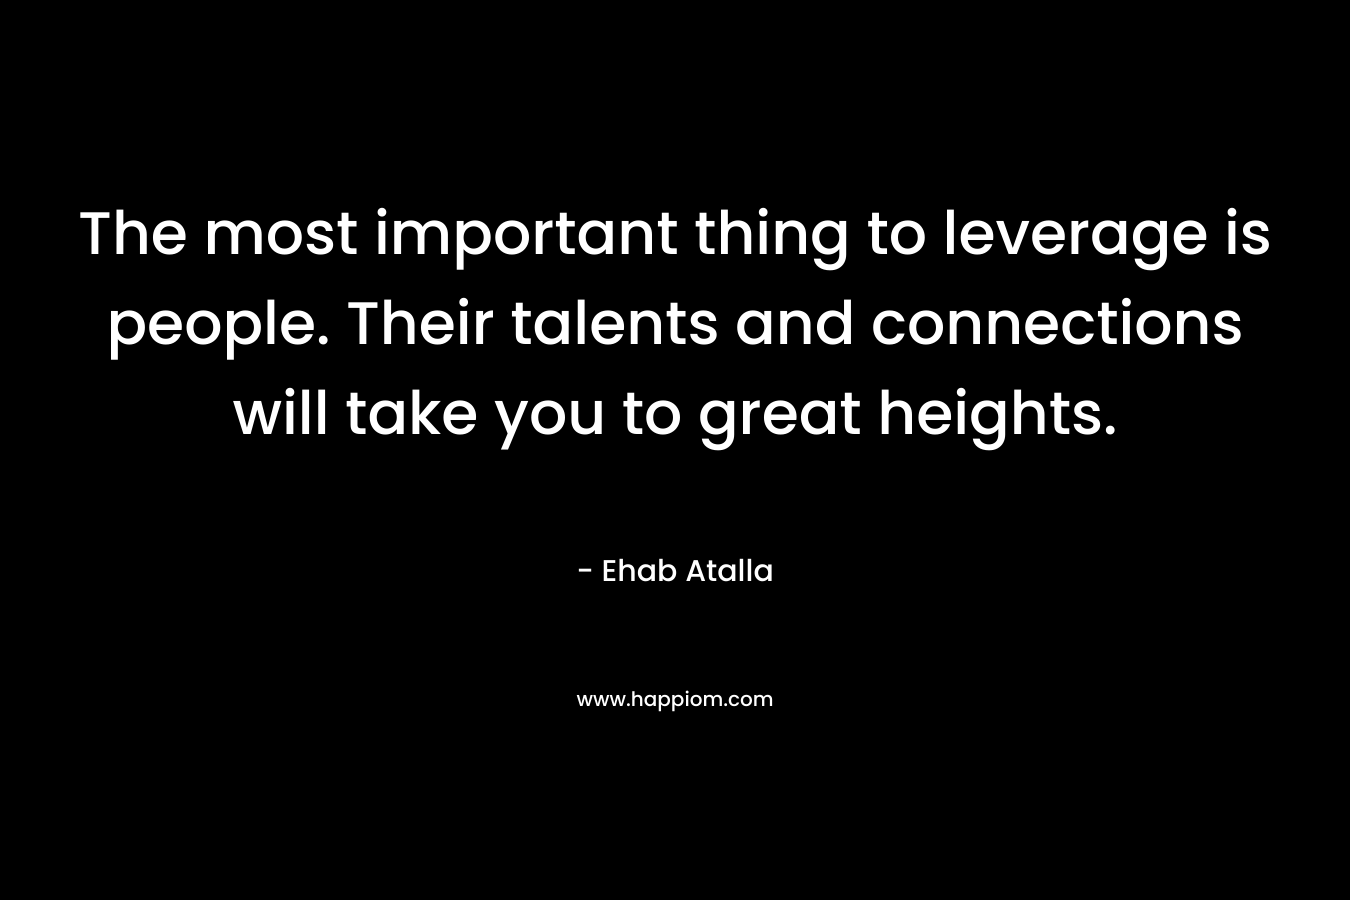 The most important thing to leverage is people. Their talents and connections will take you to great heights. – Ehab Atalla